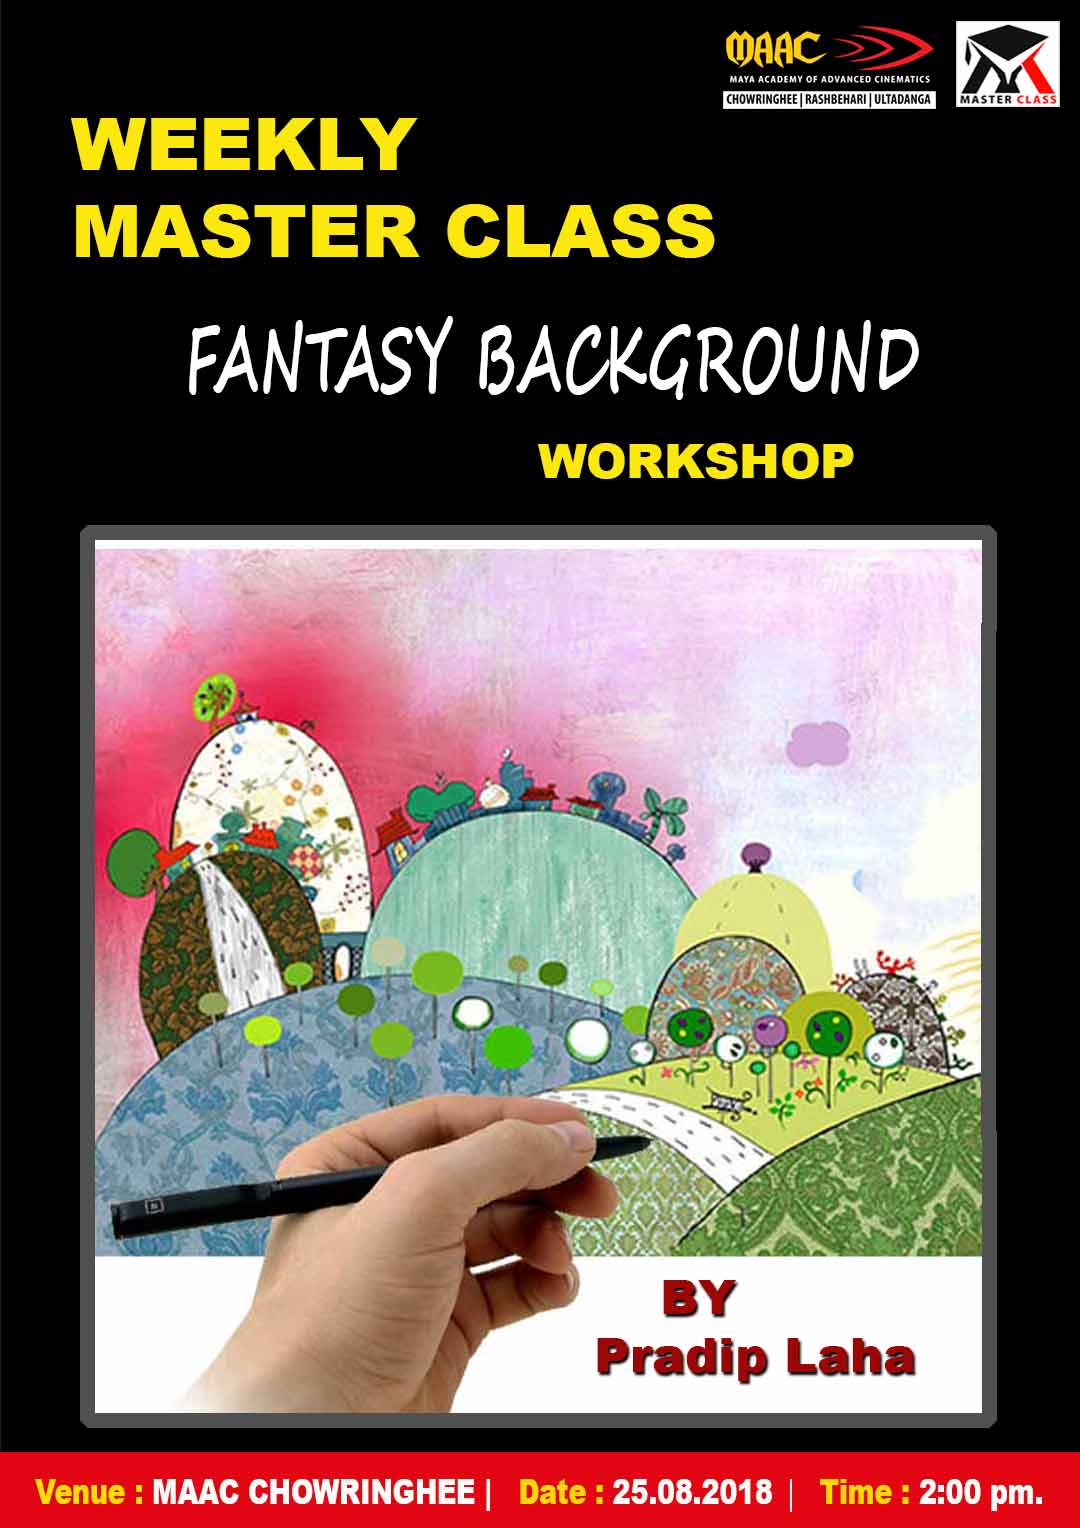 Weekly Master Class on Fantasy Background Workshop